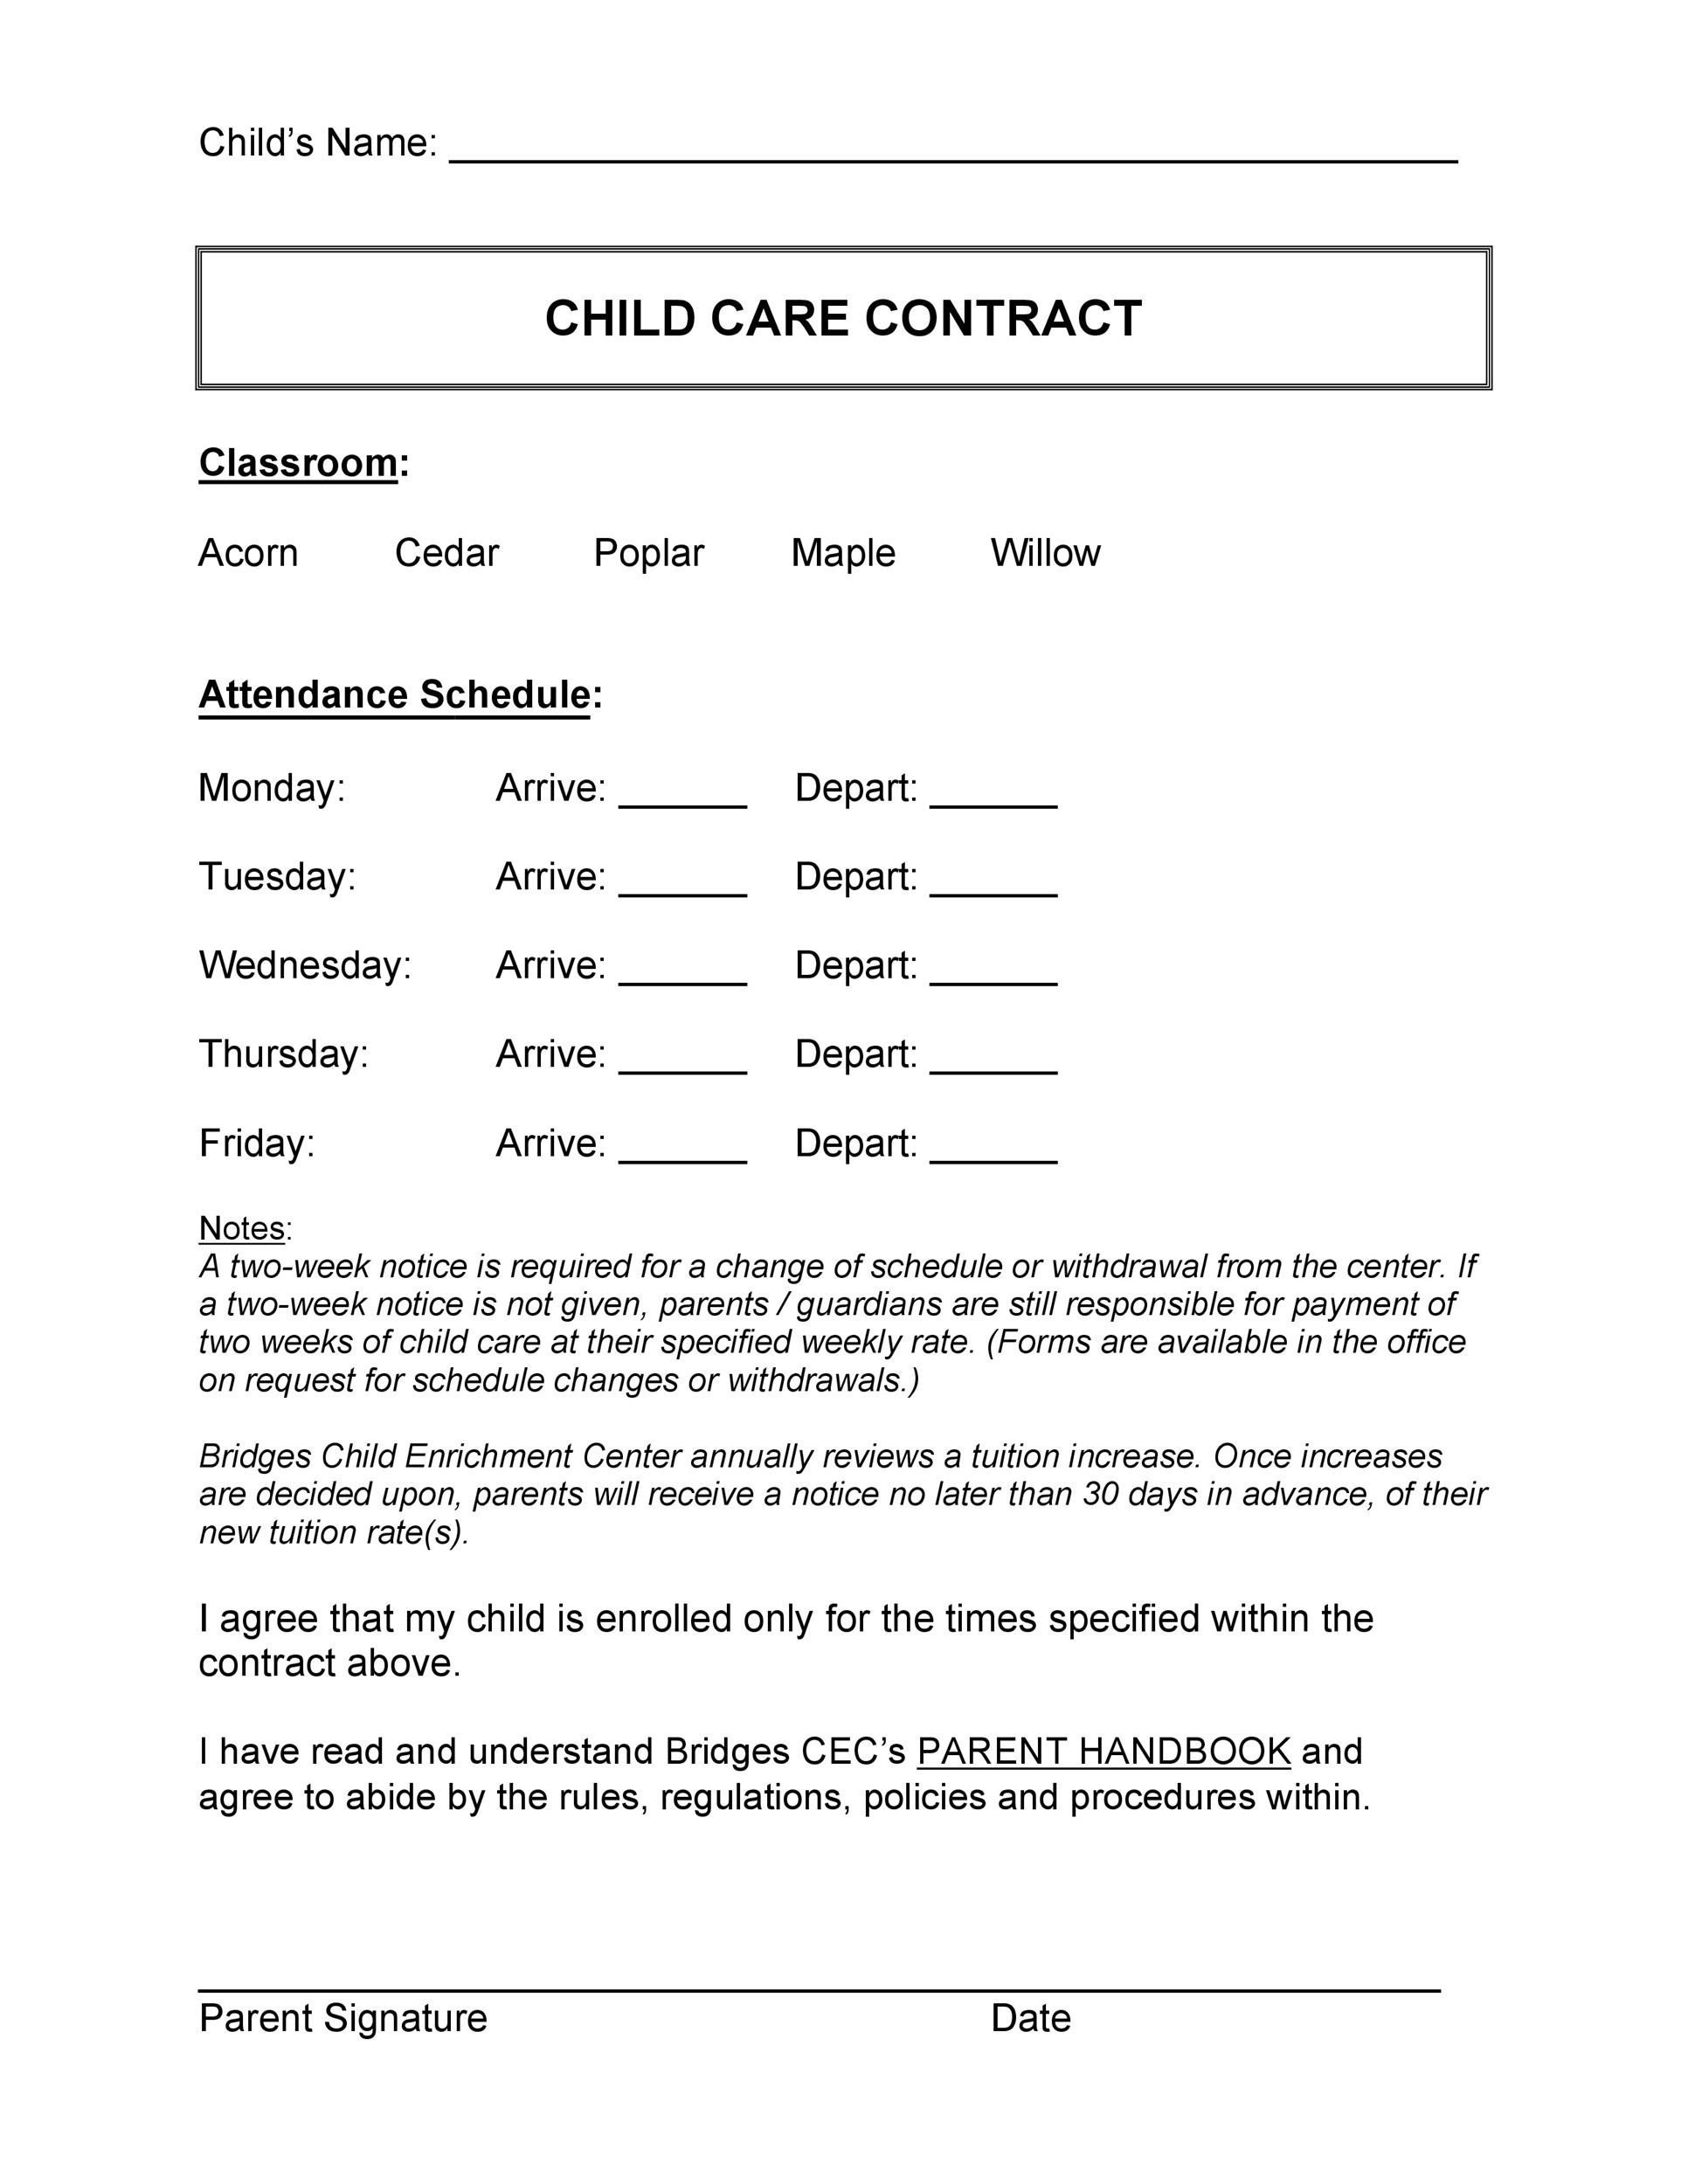 50 Daycare Child Care Babysitting Contract Templates Free 